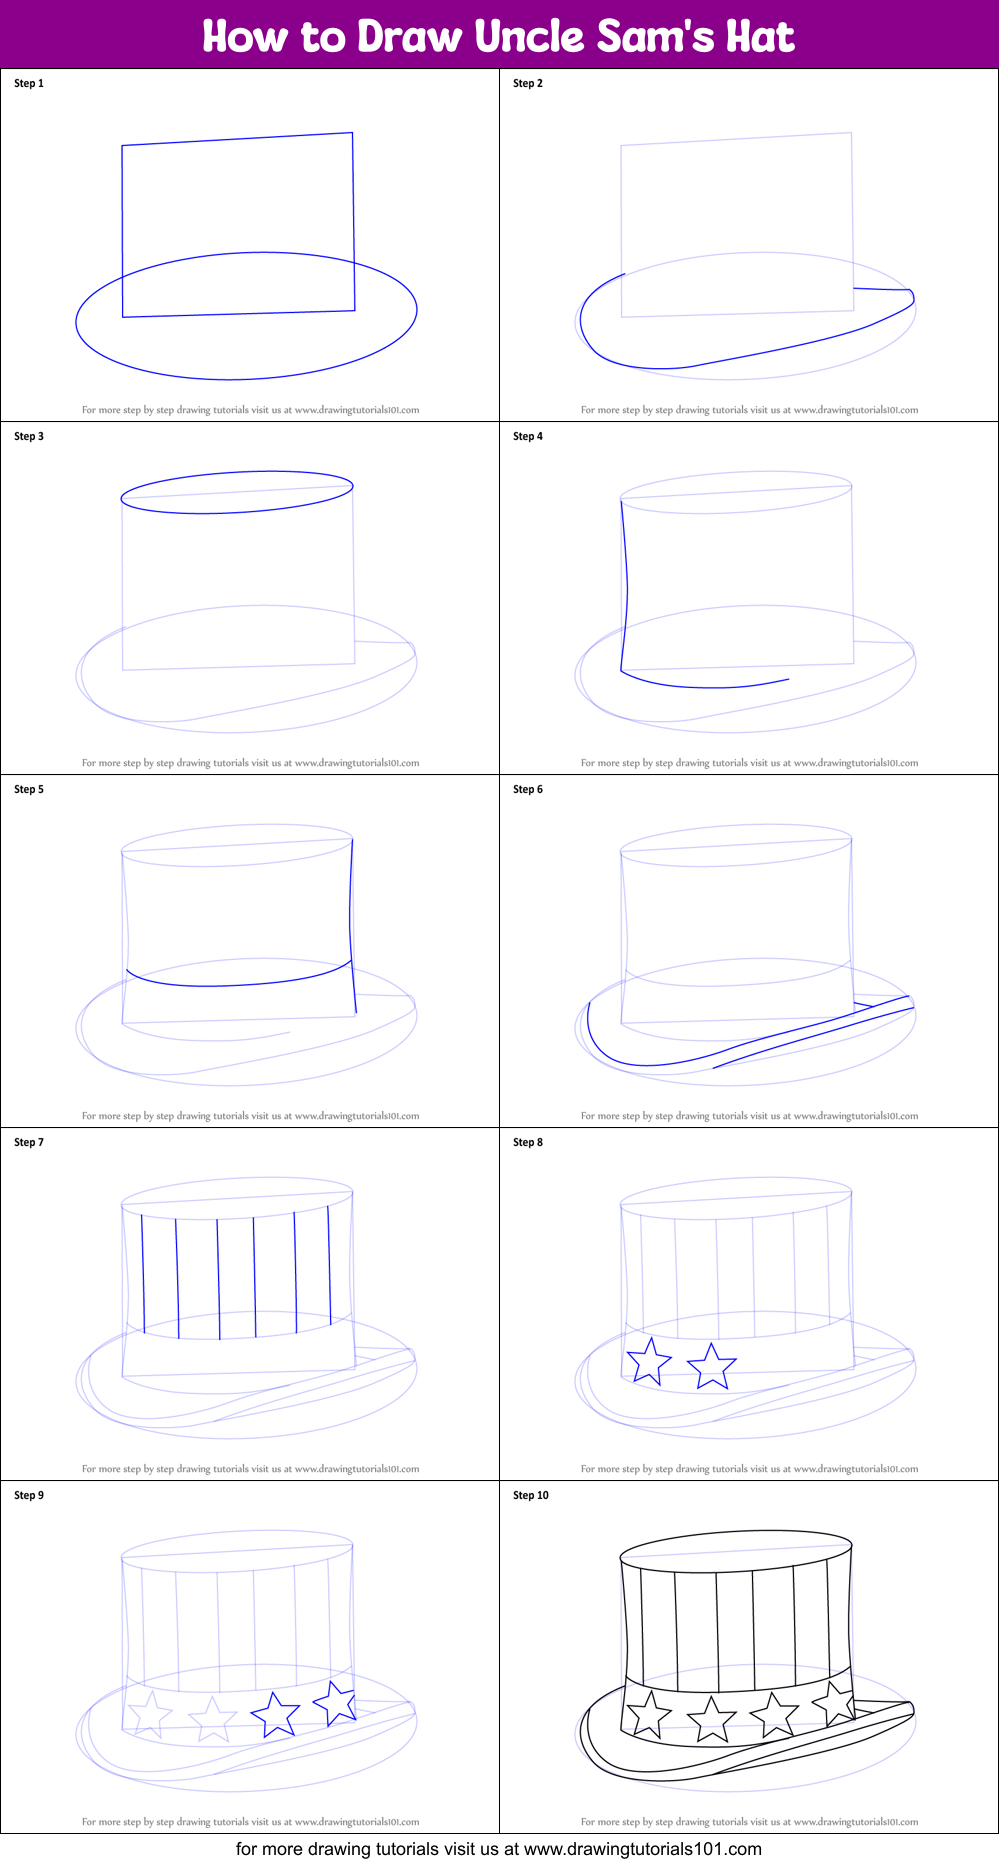 Top How To Draw Uncle Sam s Hat of all time Learn more here 